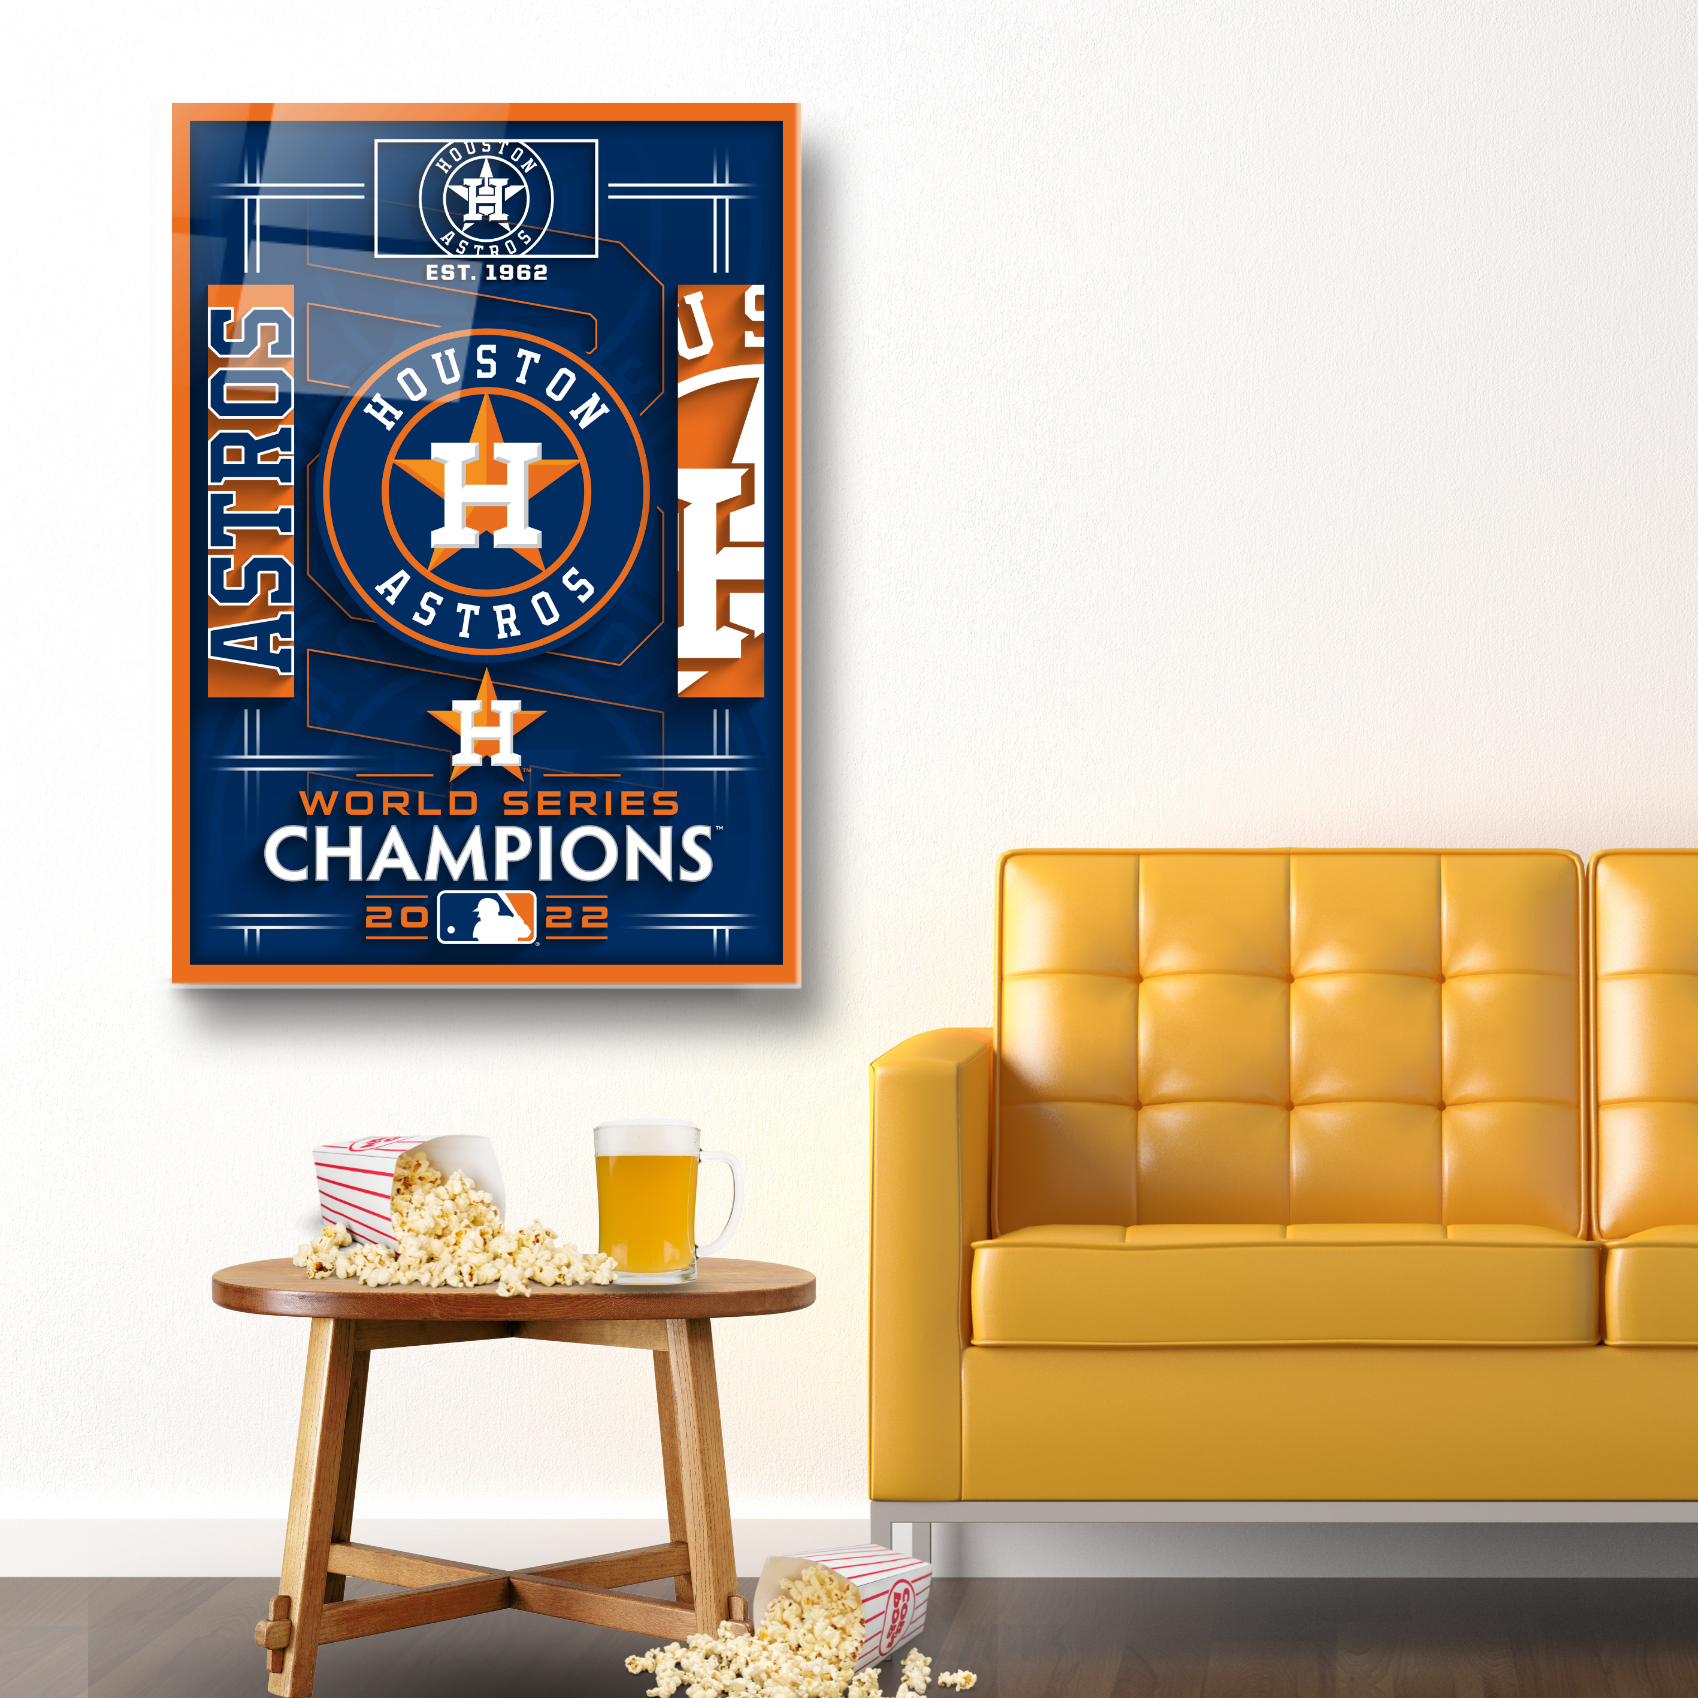 Houston Astros 2005 League Championship Photograph with StatIsticIstics  Nested on a 12 x 15 Plaque